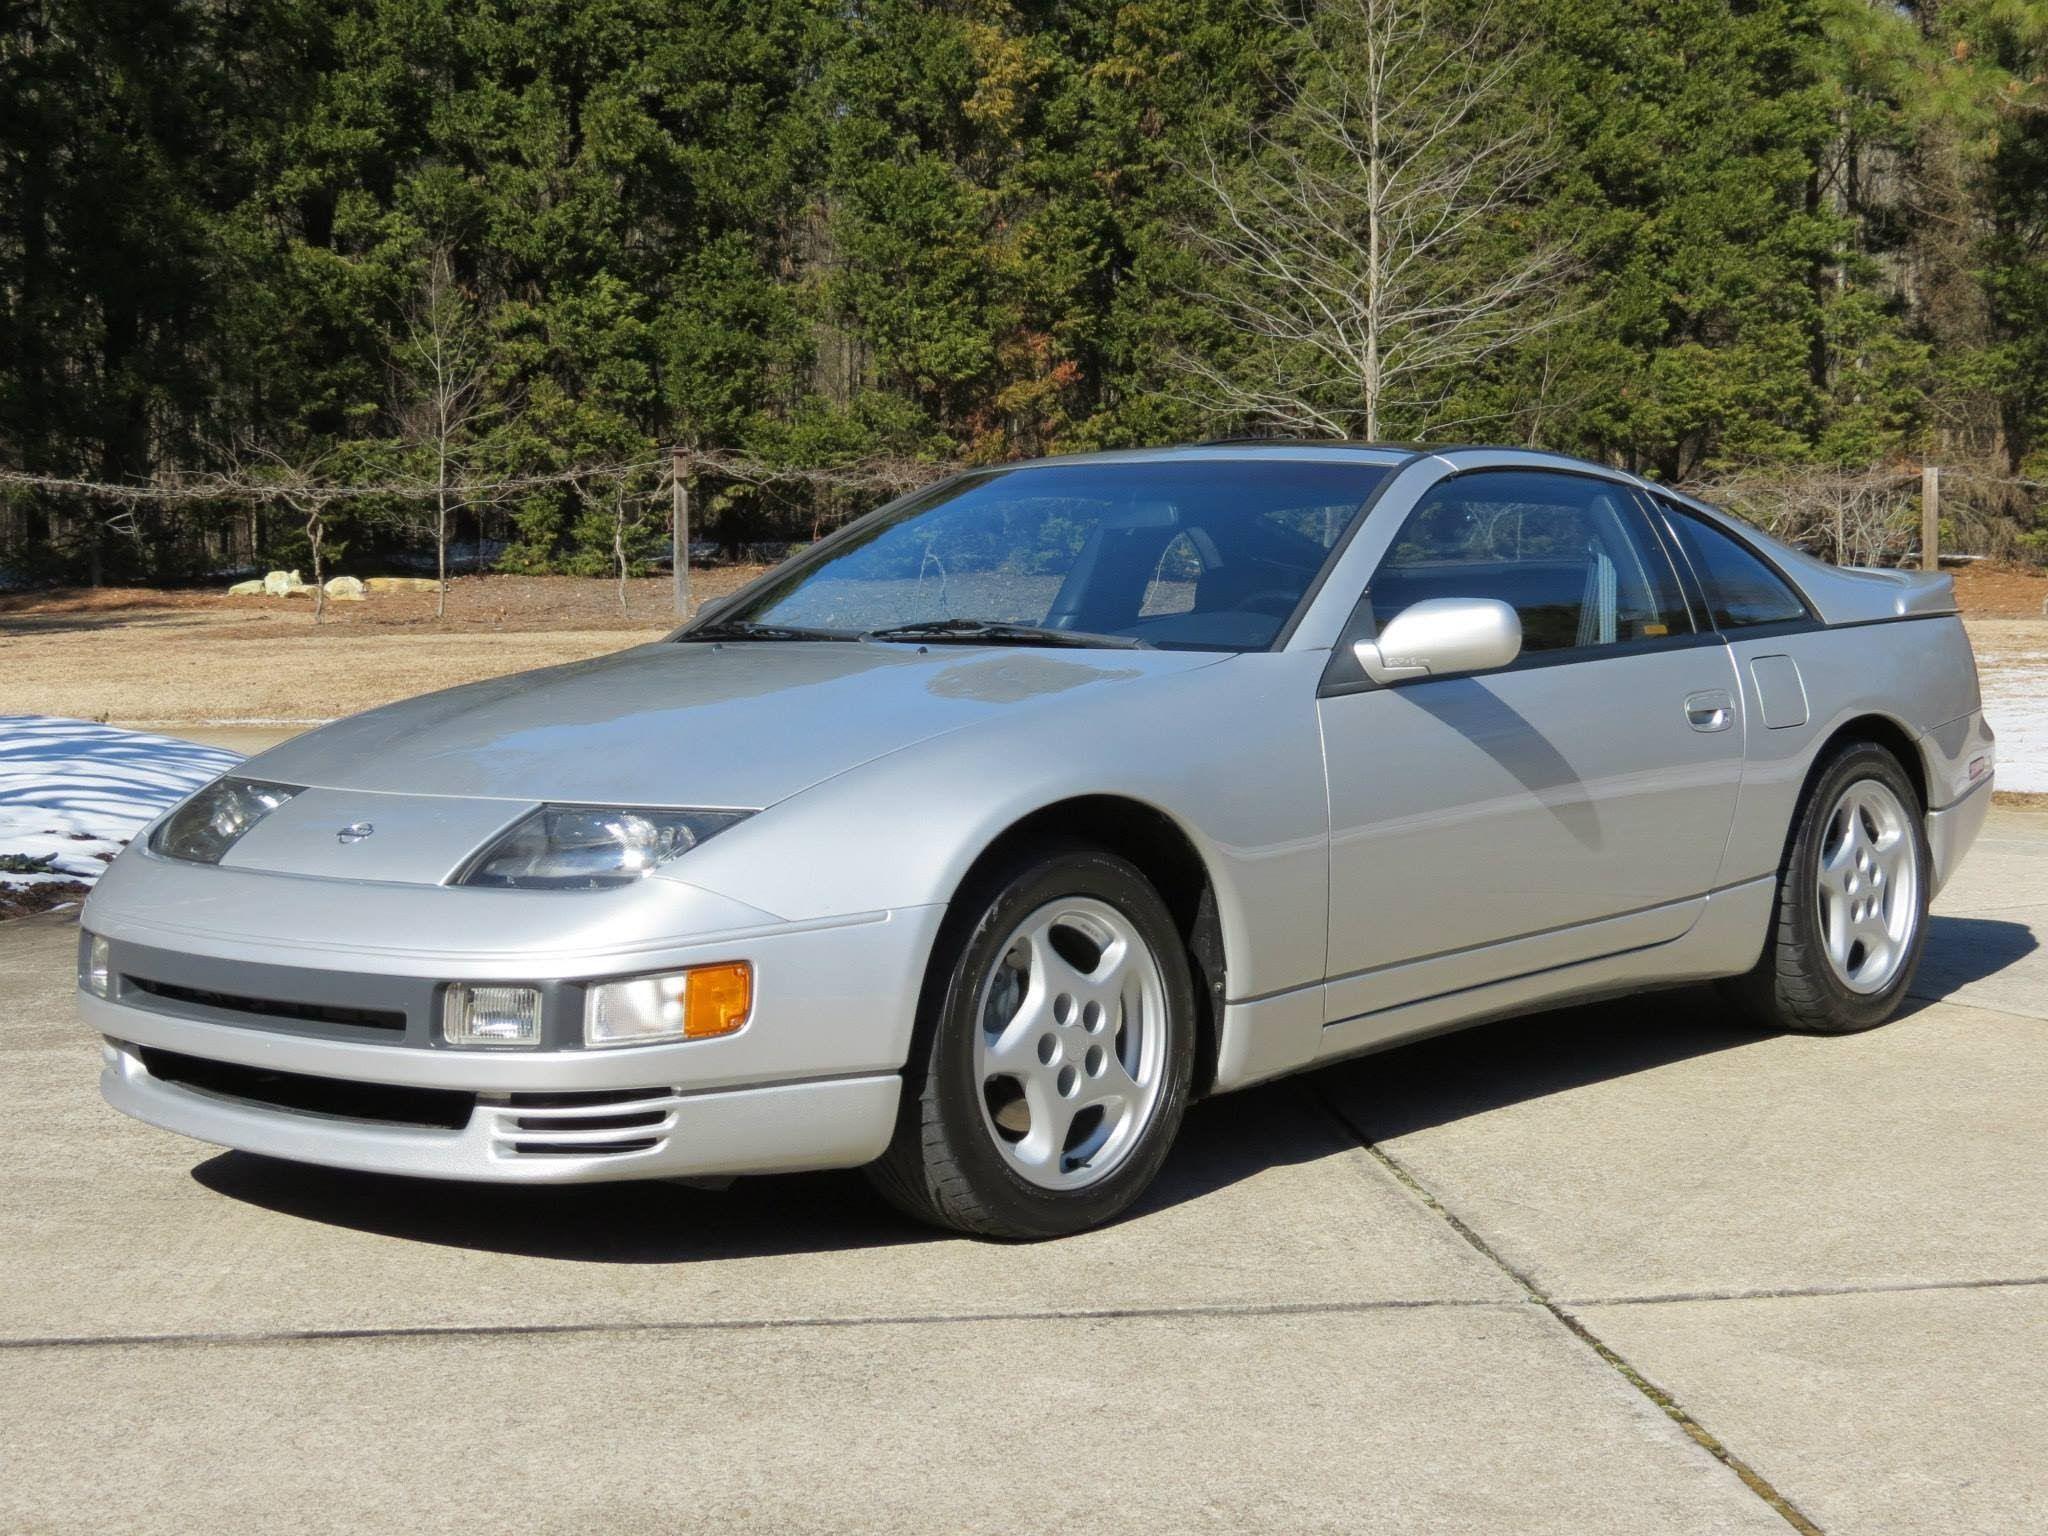 Nissan 300ZX Twin Turbo Start Up, Exhaust, Drive, and In Depth